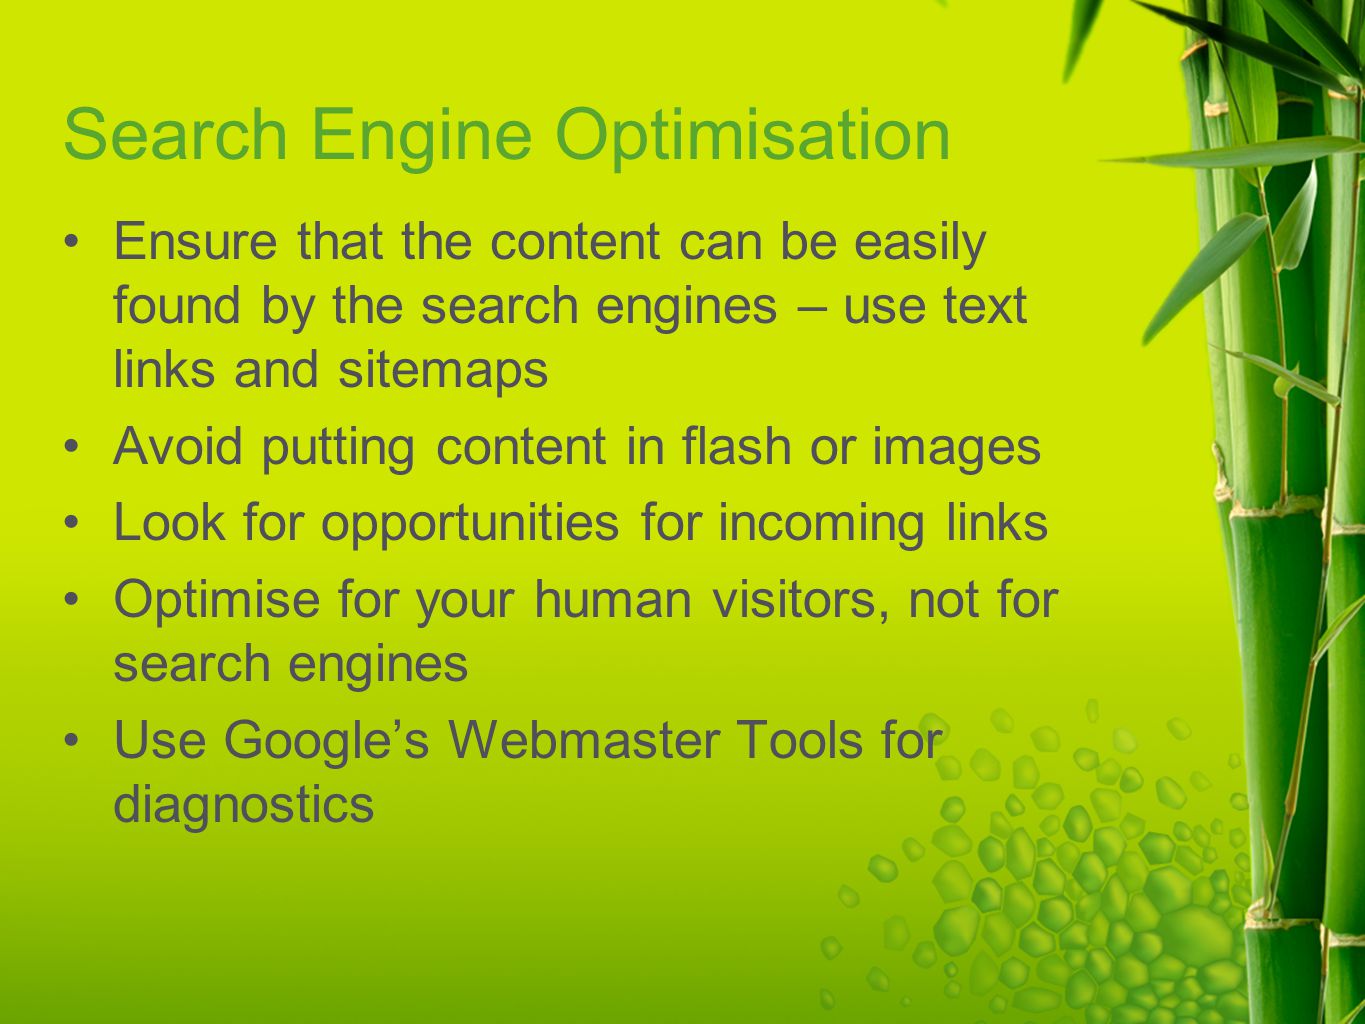 Search Engine Optimisation Ensure that the content can be easily found by the search engines – use text links and sitemaps Avoid putting content in flash or images Look for opportunities for incoming links Optimise for your human visitors, not for search engines Use Google’s Webmaster Tools for diagnostics